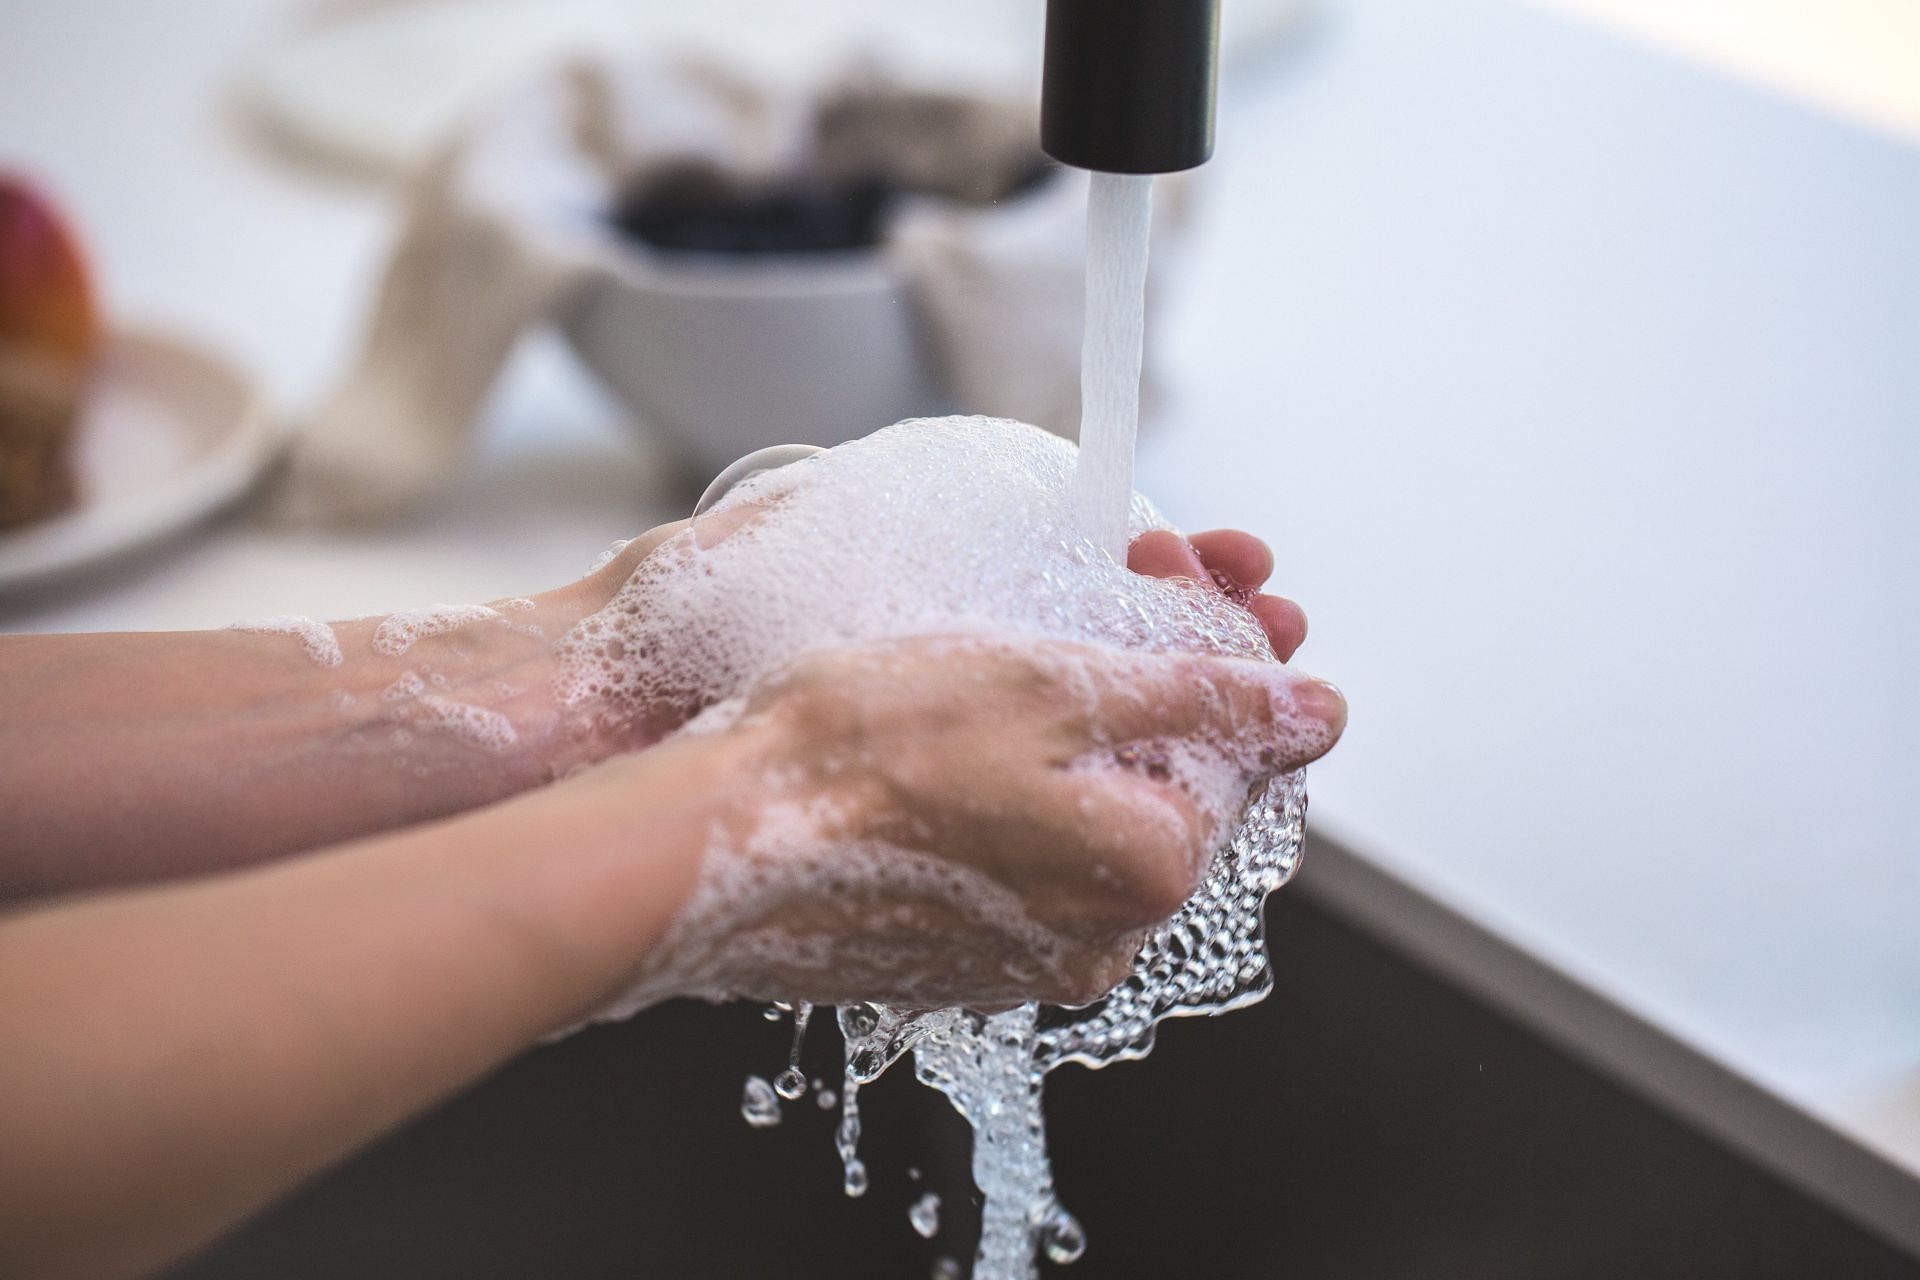  By washing your hands regularly, you can reduce the risk of infection and illness. (Image via Pexels))